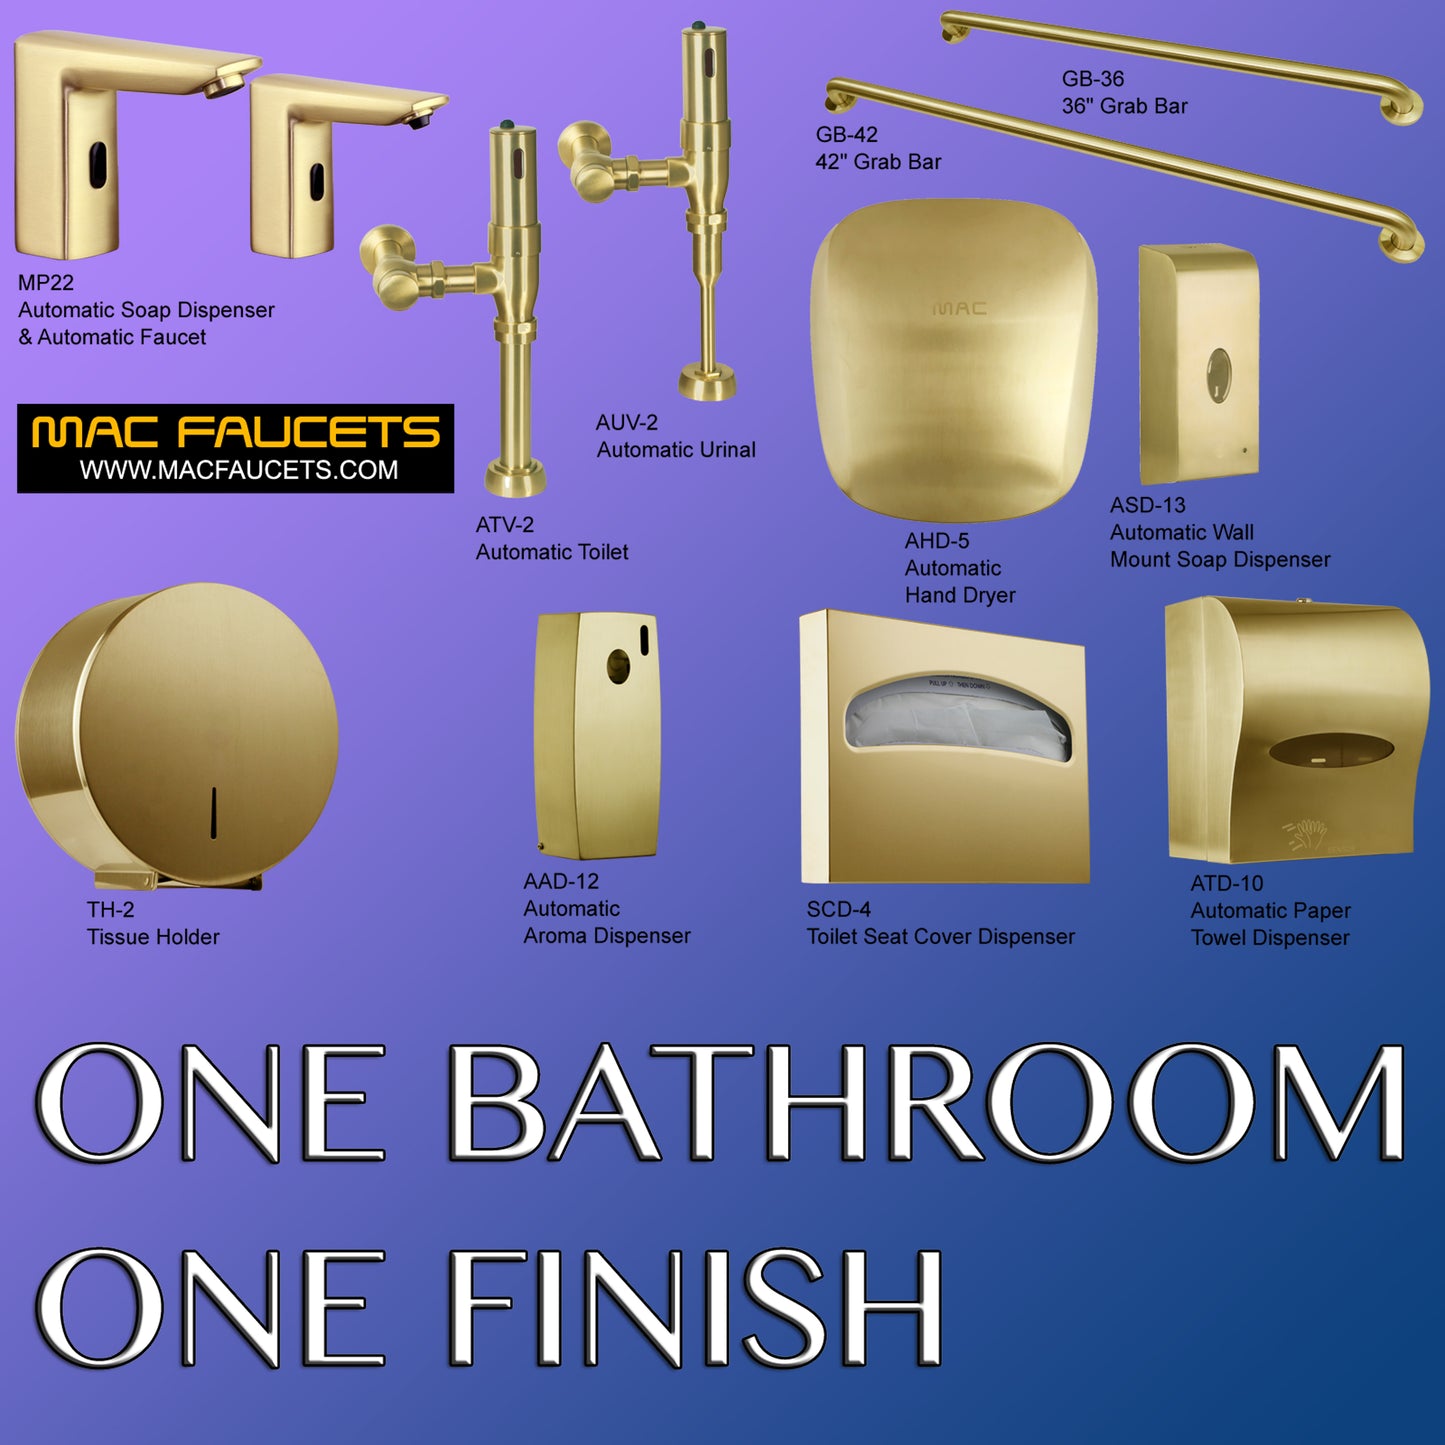 Automatic urinal, toilet flush valves, faucet and soap dispenser in Satin Brass